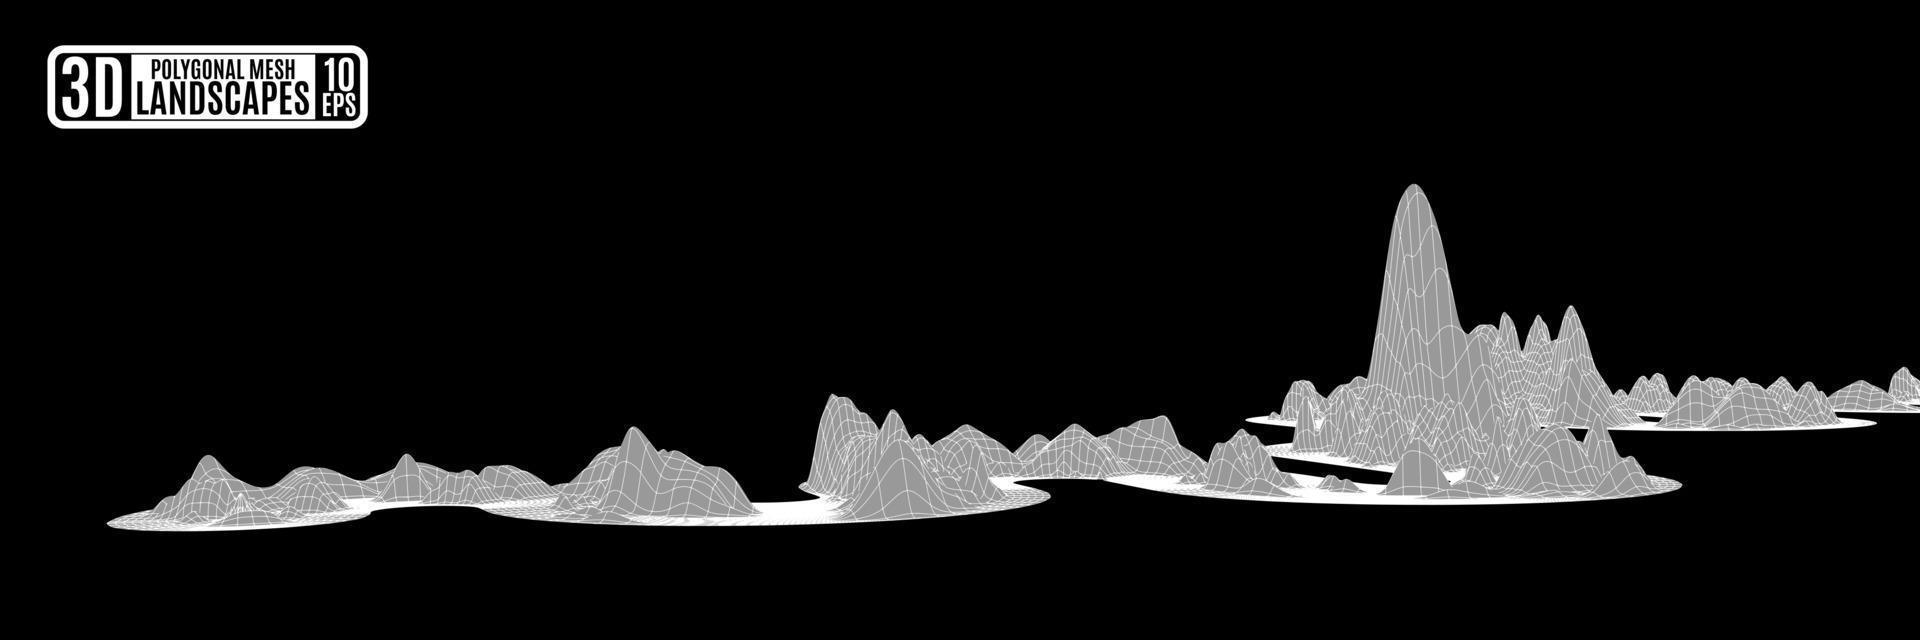 gray mountain landscape of polygons vector drawing